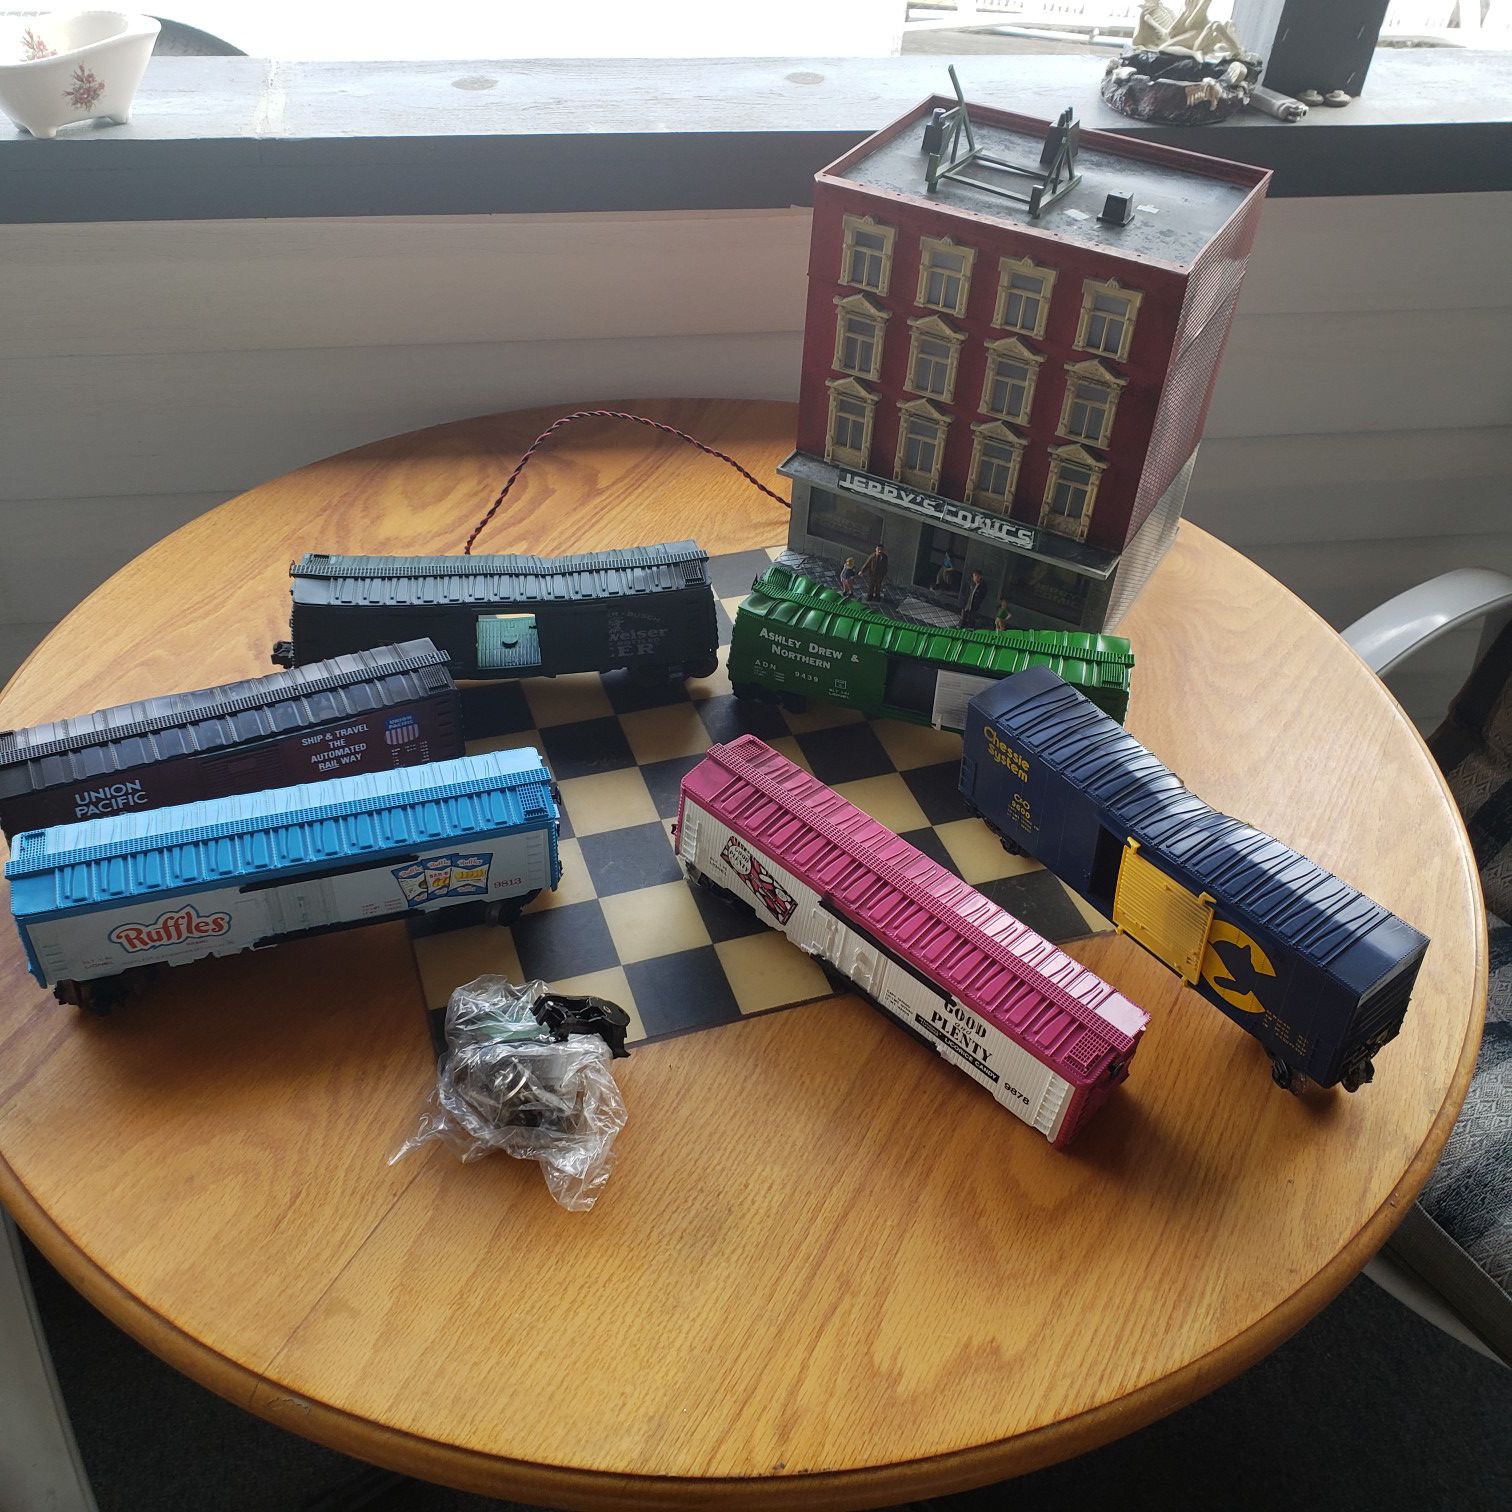 Have some lionel trains